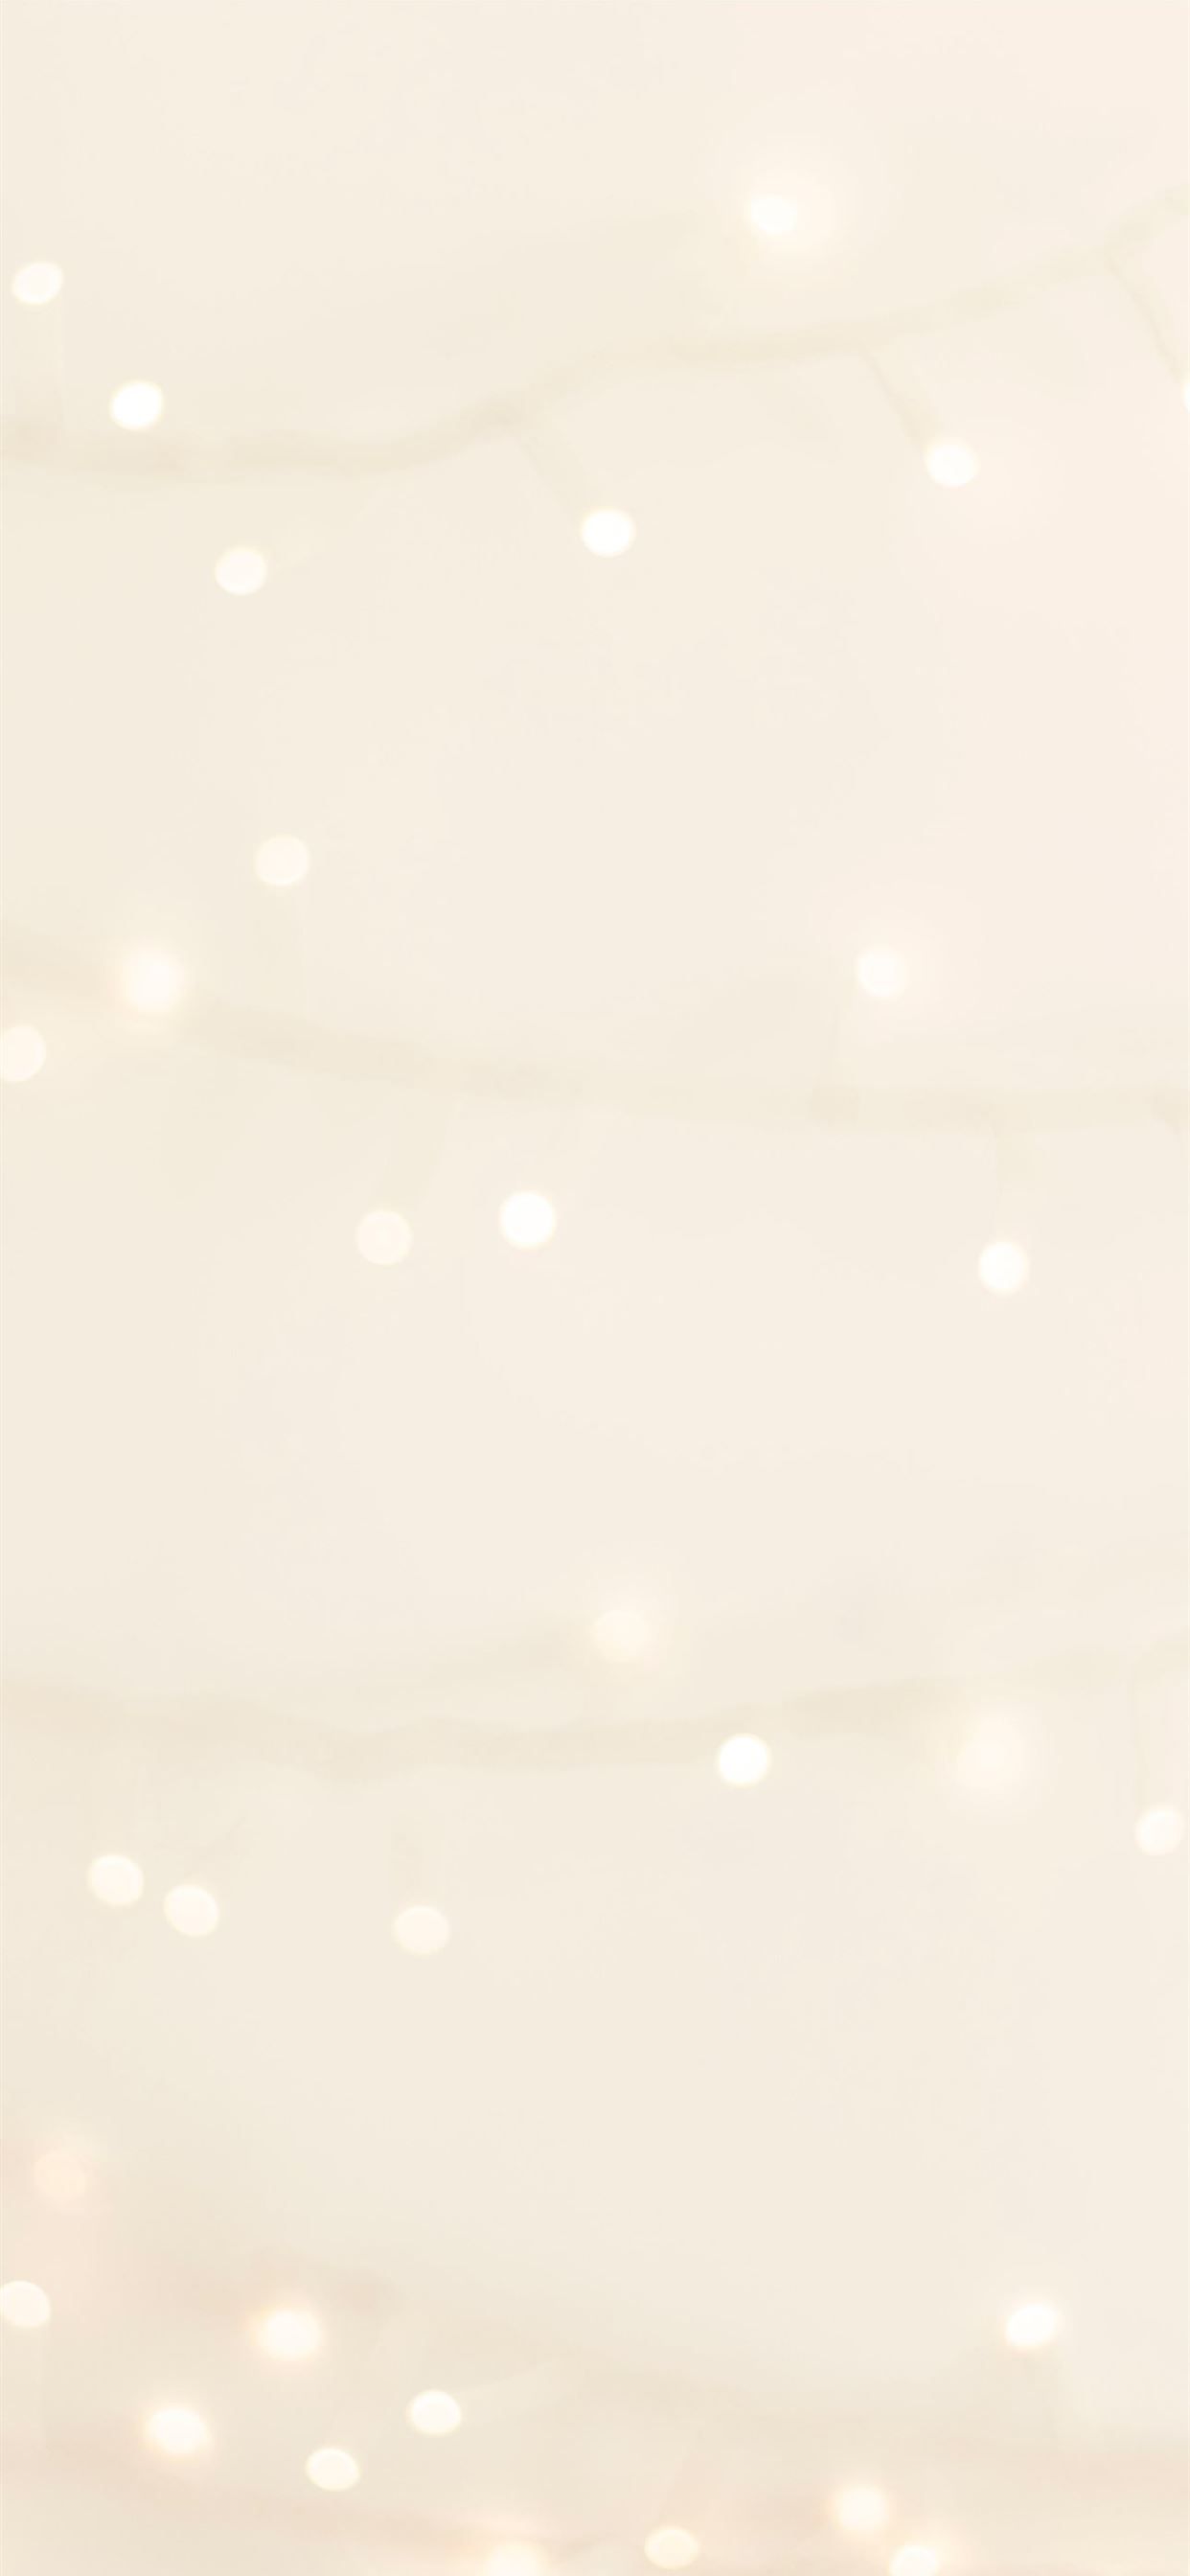 IPhone wallpaper with white bokeh lights on a cream background - Beige